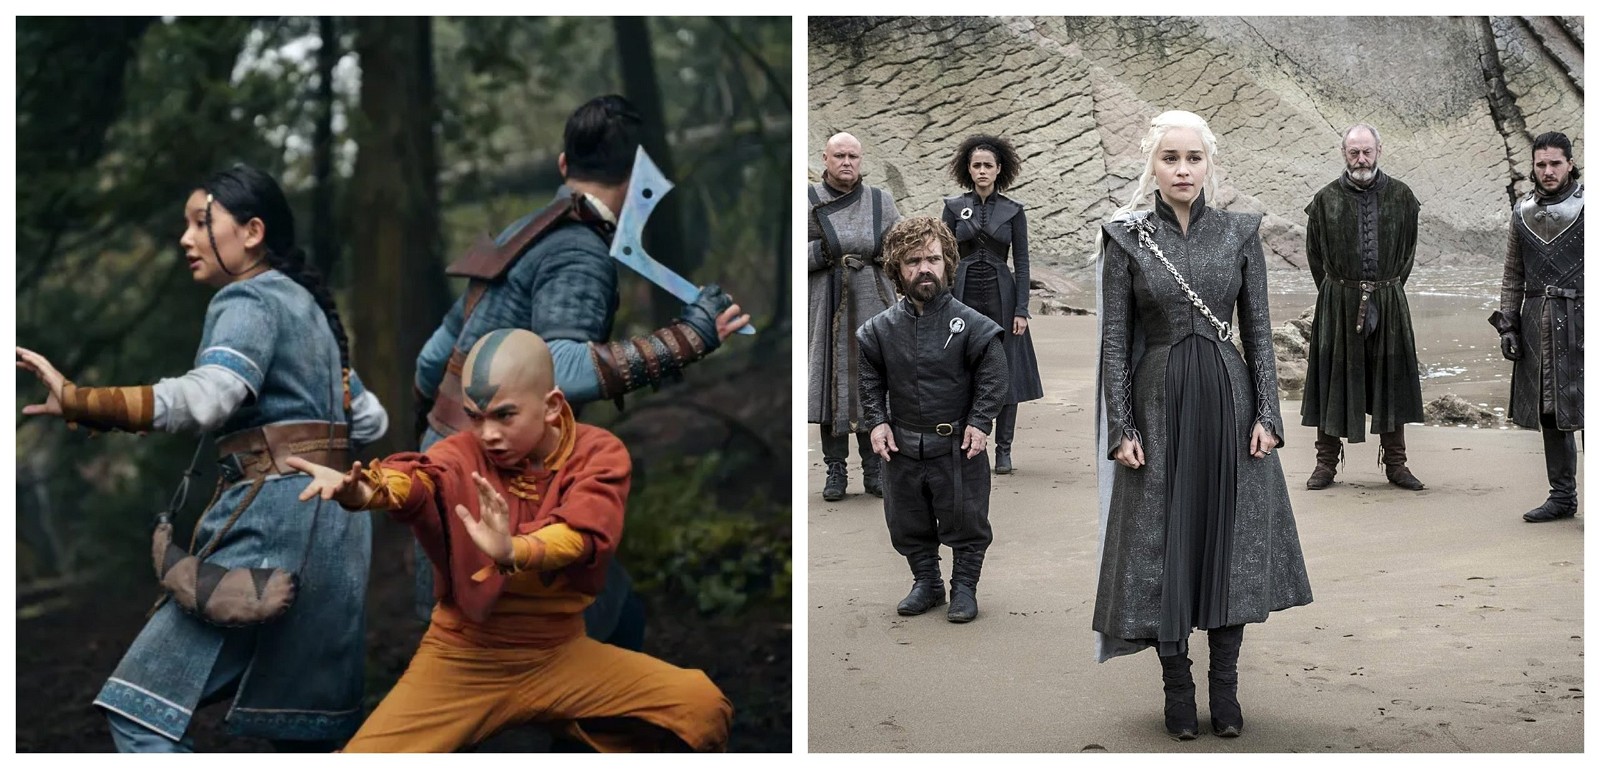 The major connection between Avatar: The Last Airbender and Game of Thrones